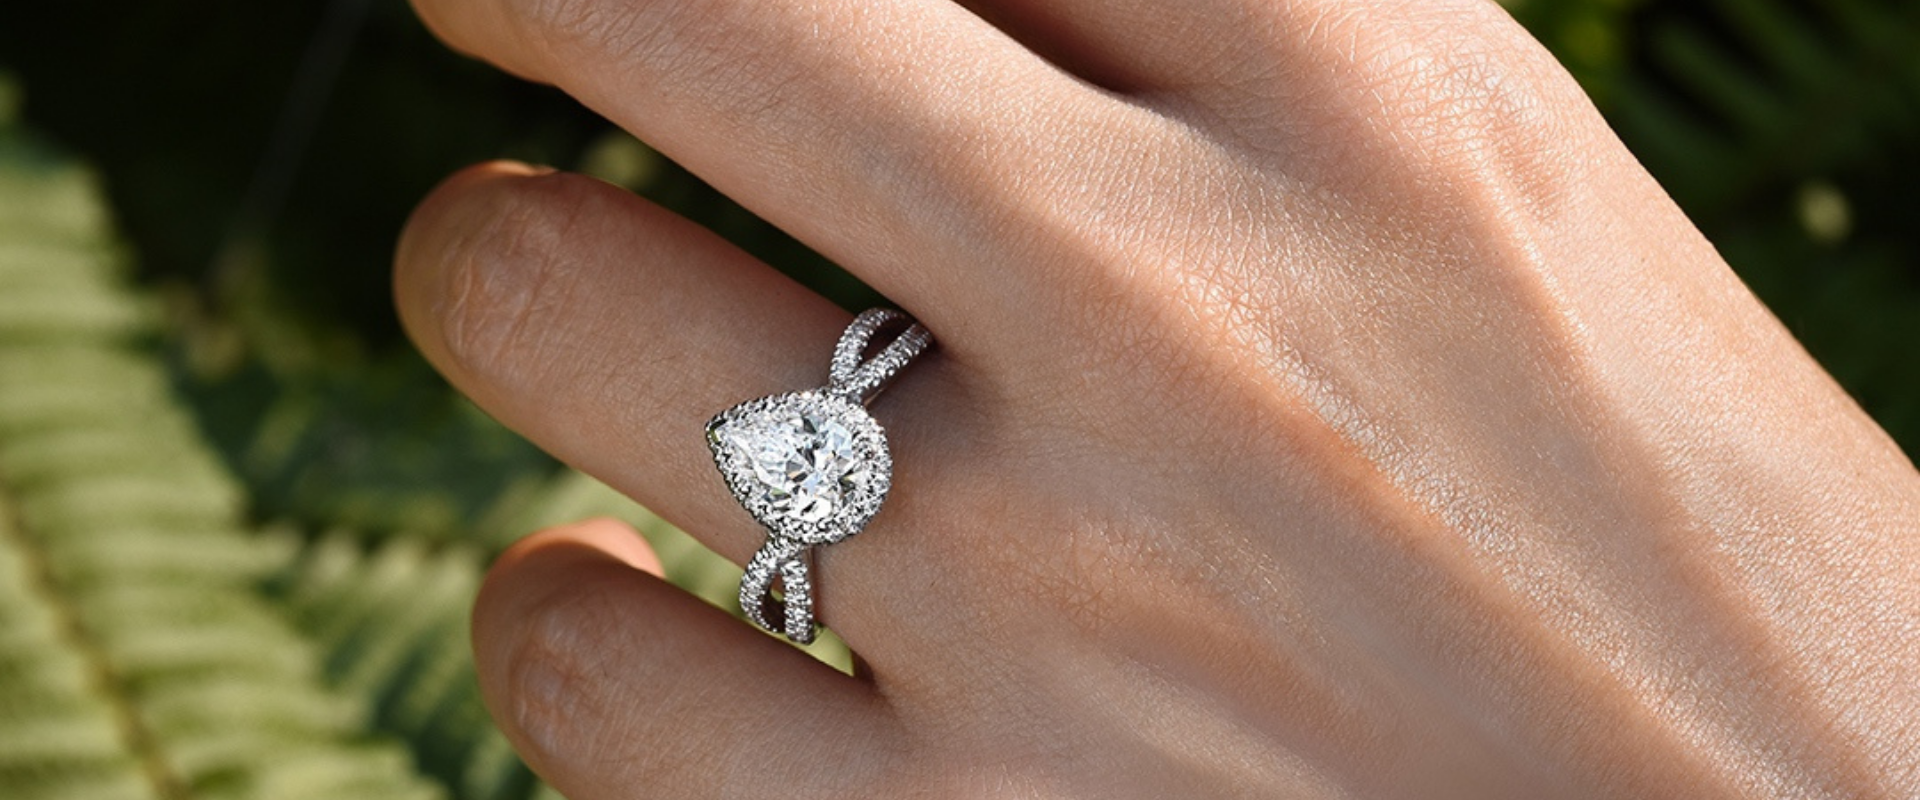 The Engagement Ring Trends You Need to Know for 2020